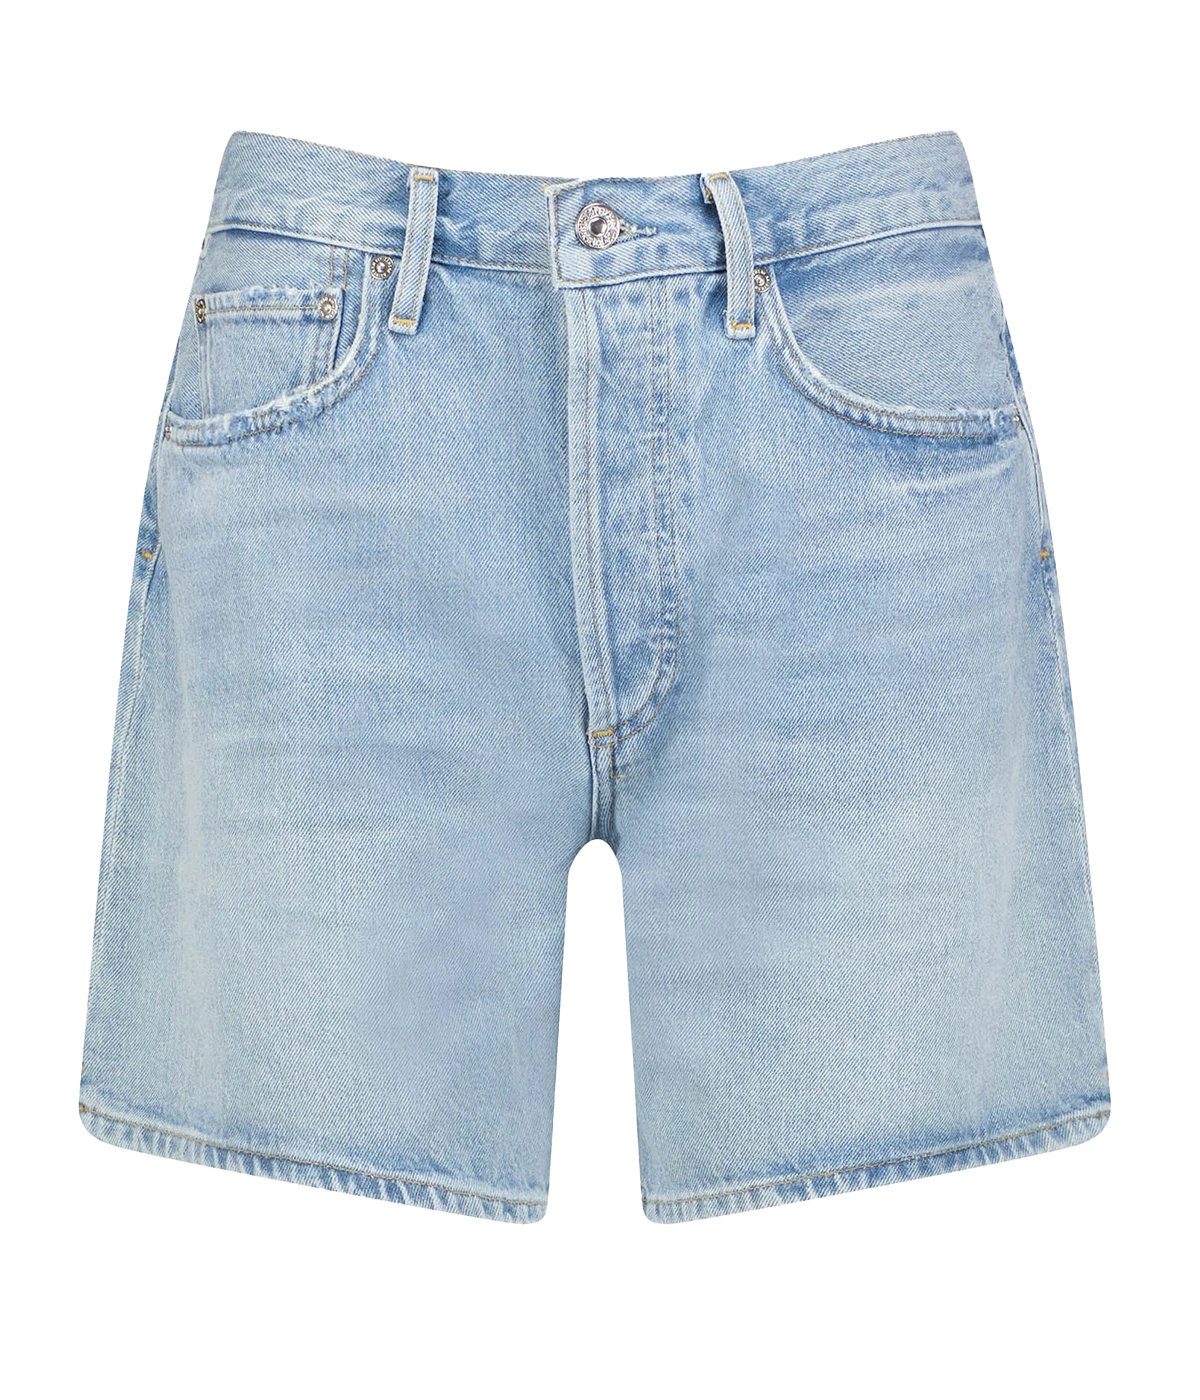 The perfect denim short. 5 pocket, belt loops,  button fly closure. The perfect summer staple, wear these denim shorts on your next european vacation or trip to the coast.